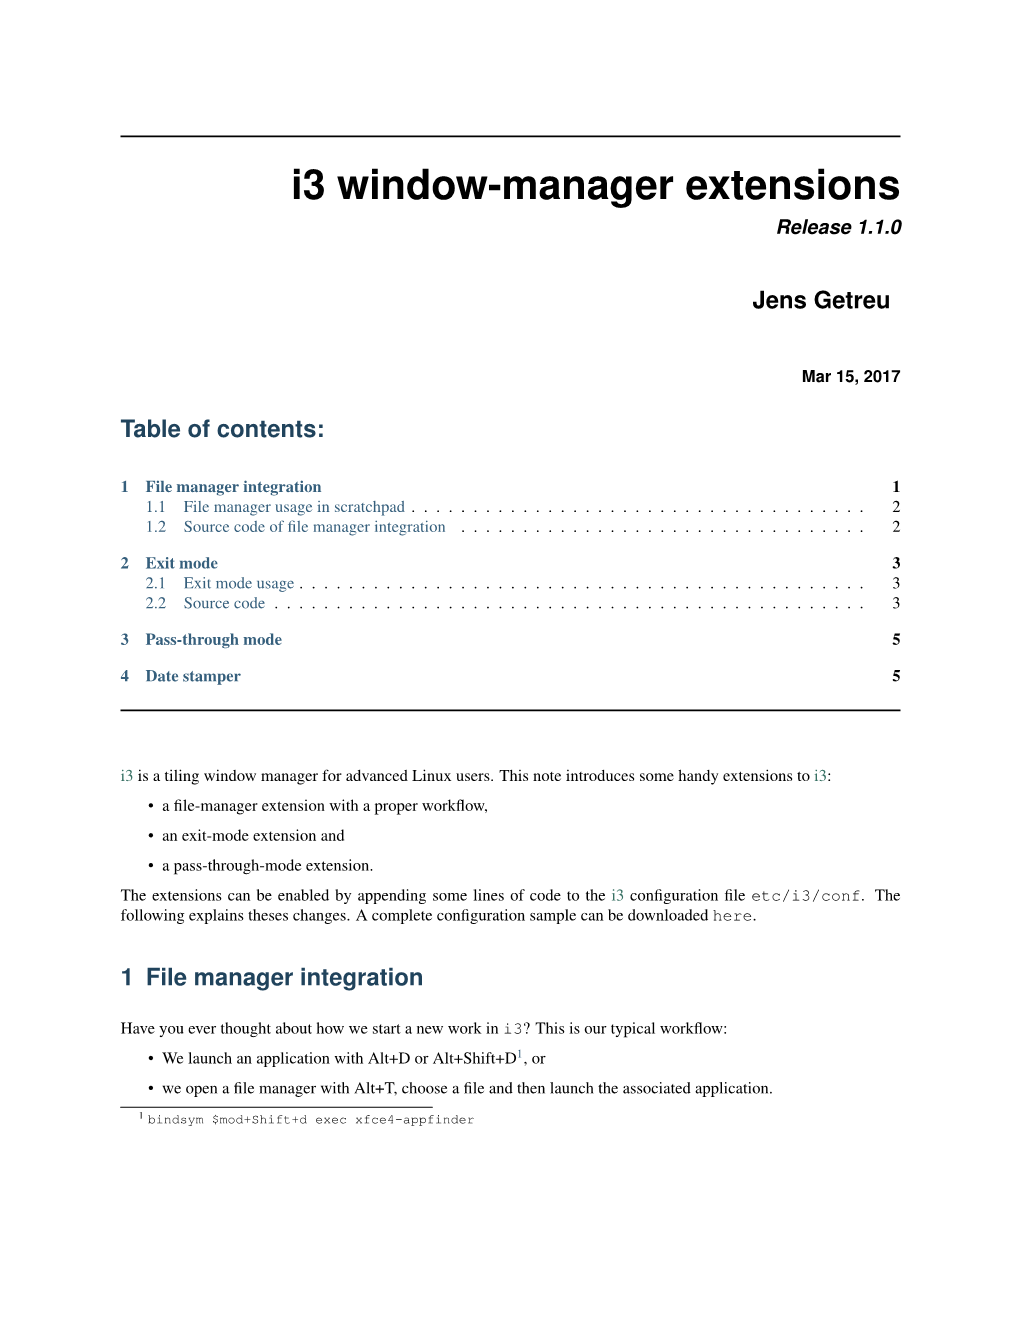 I3 Window-Manager Extensions Release 1.1.0